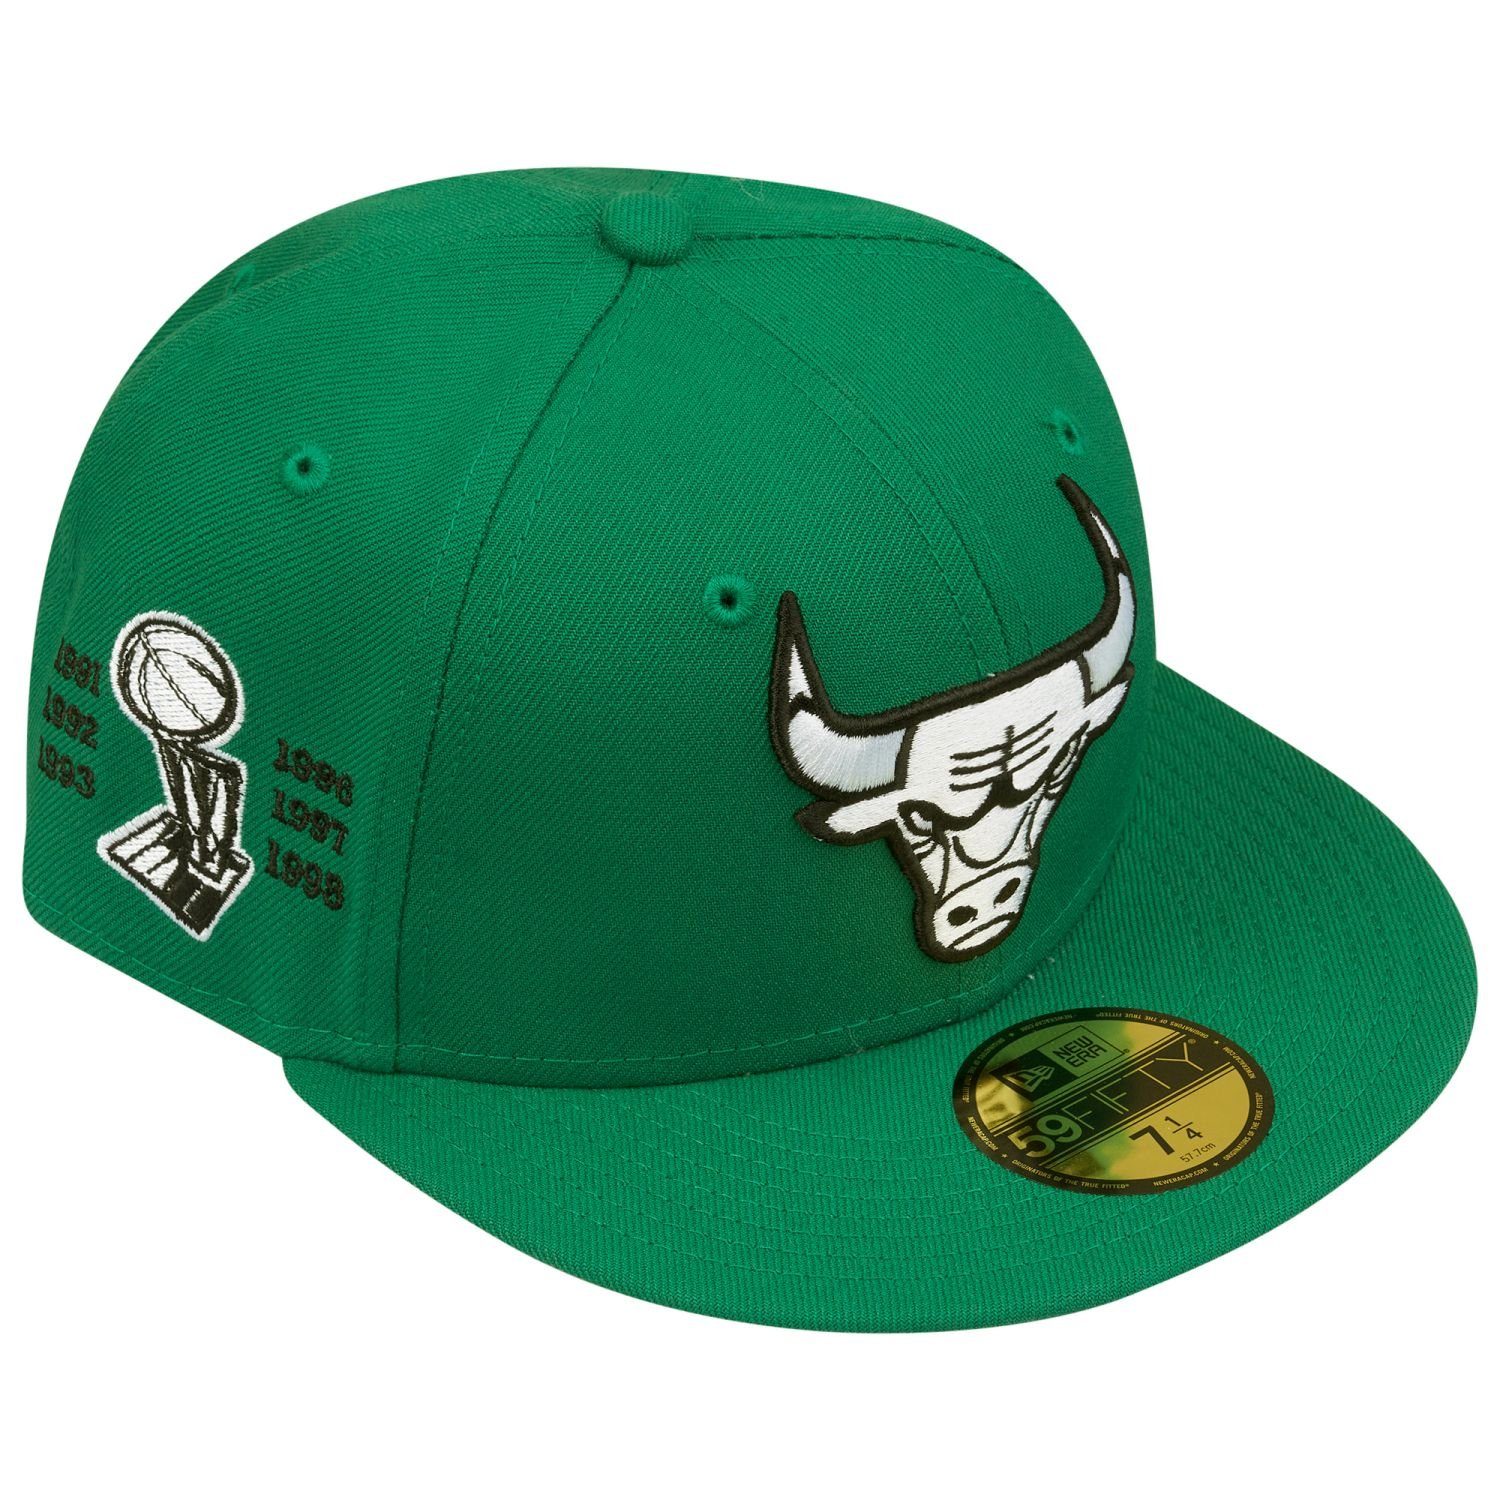 Bulls Fitted CHAMPIONS New Chicago 59Fifty Cap Era